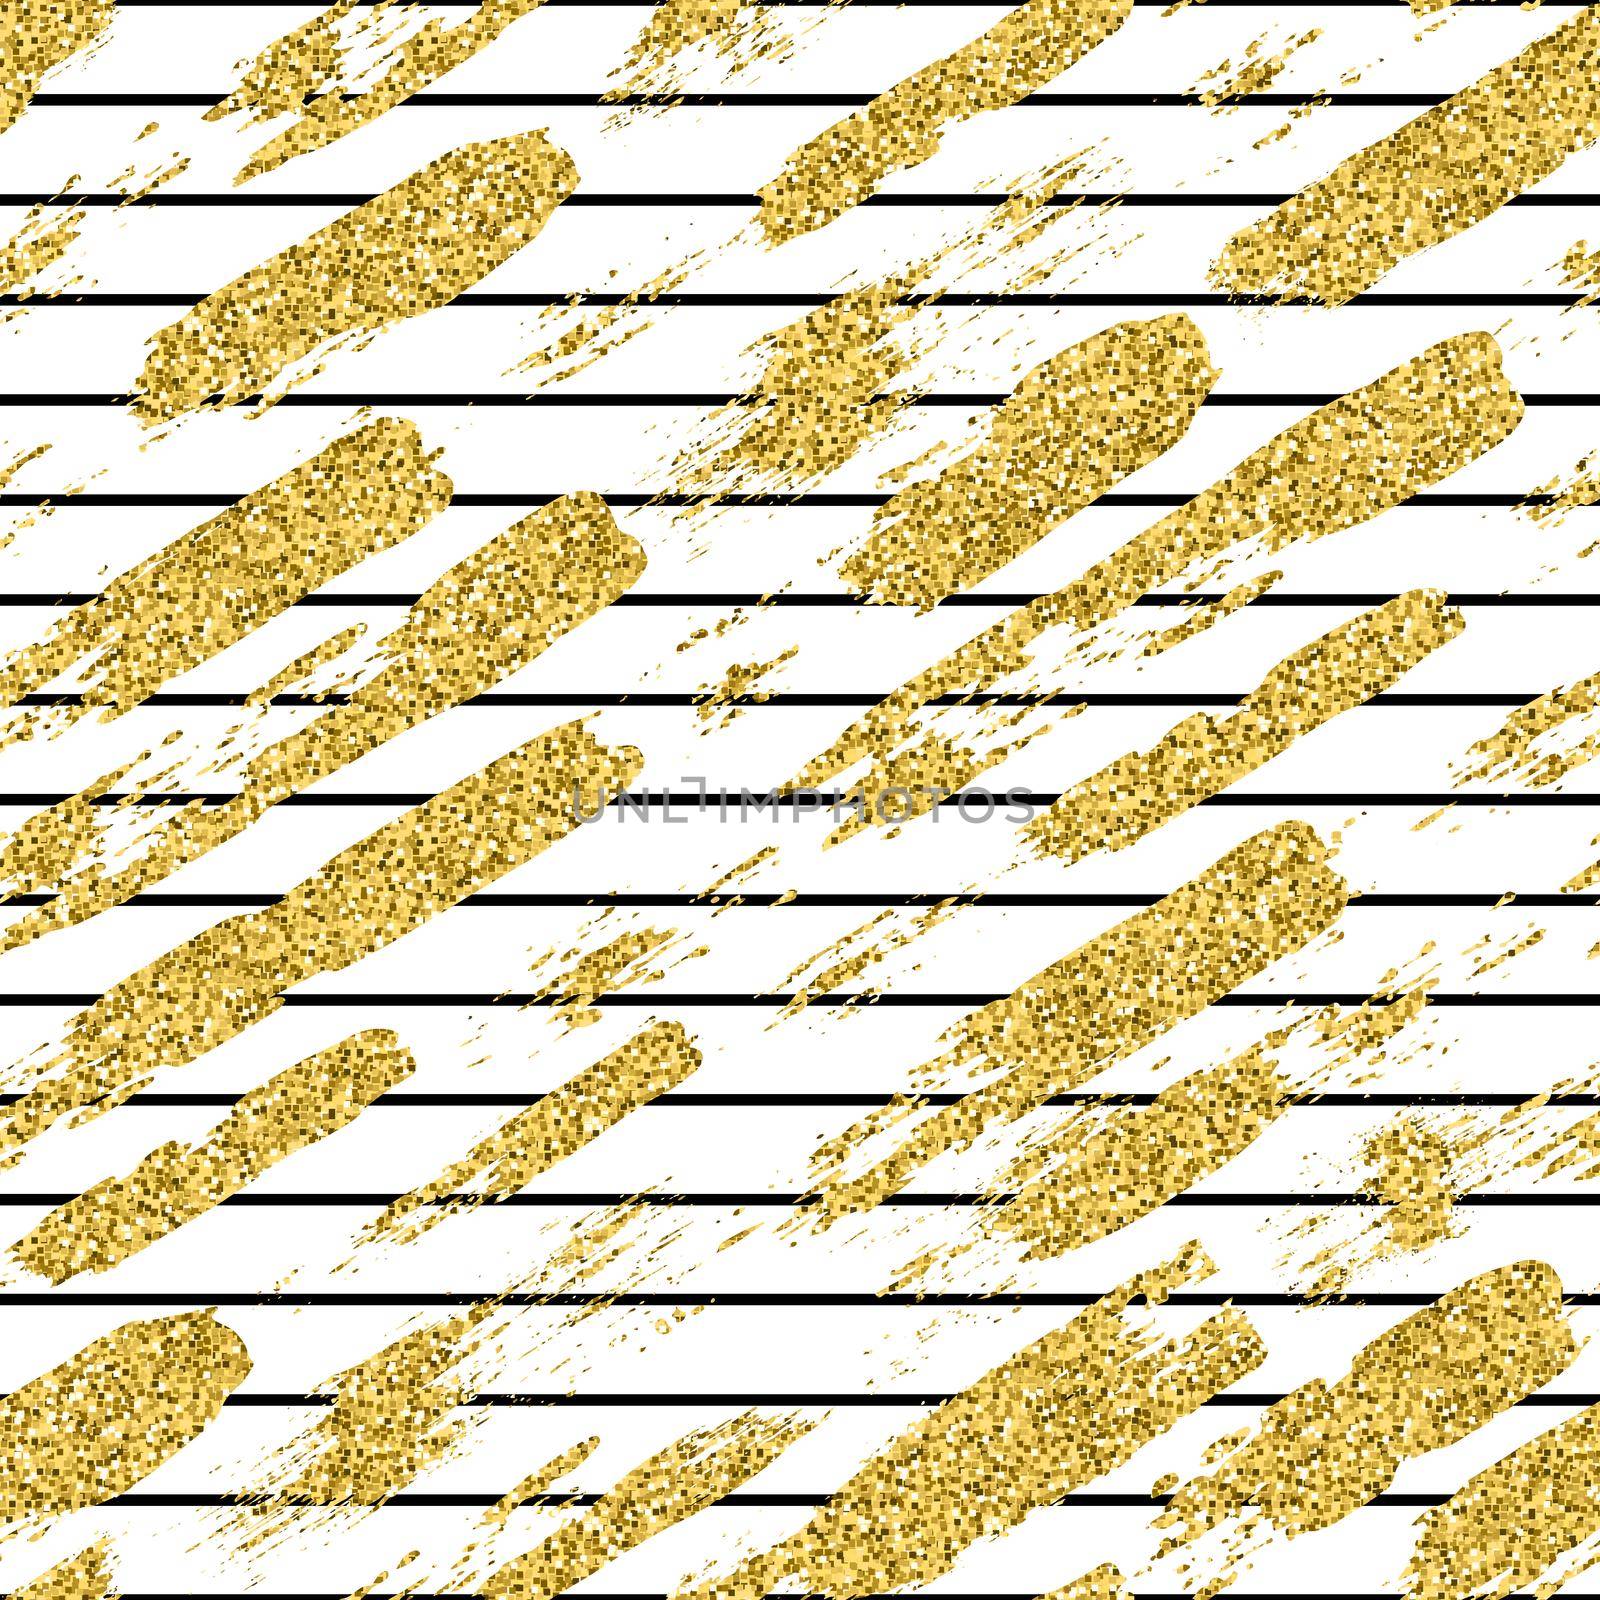 Modern seamless pattern with glitter brush stripes and strokes. Golden, black color on white background. Hand painted grange texture. Shiny spark elements. Fashion modern style. Repeat fabric print